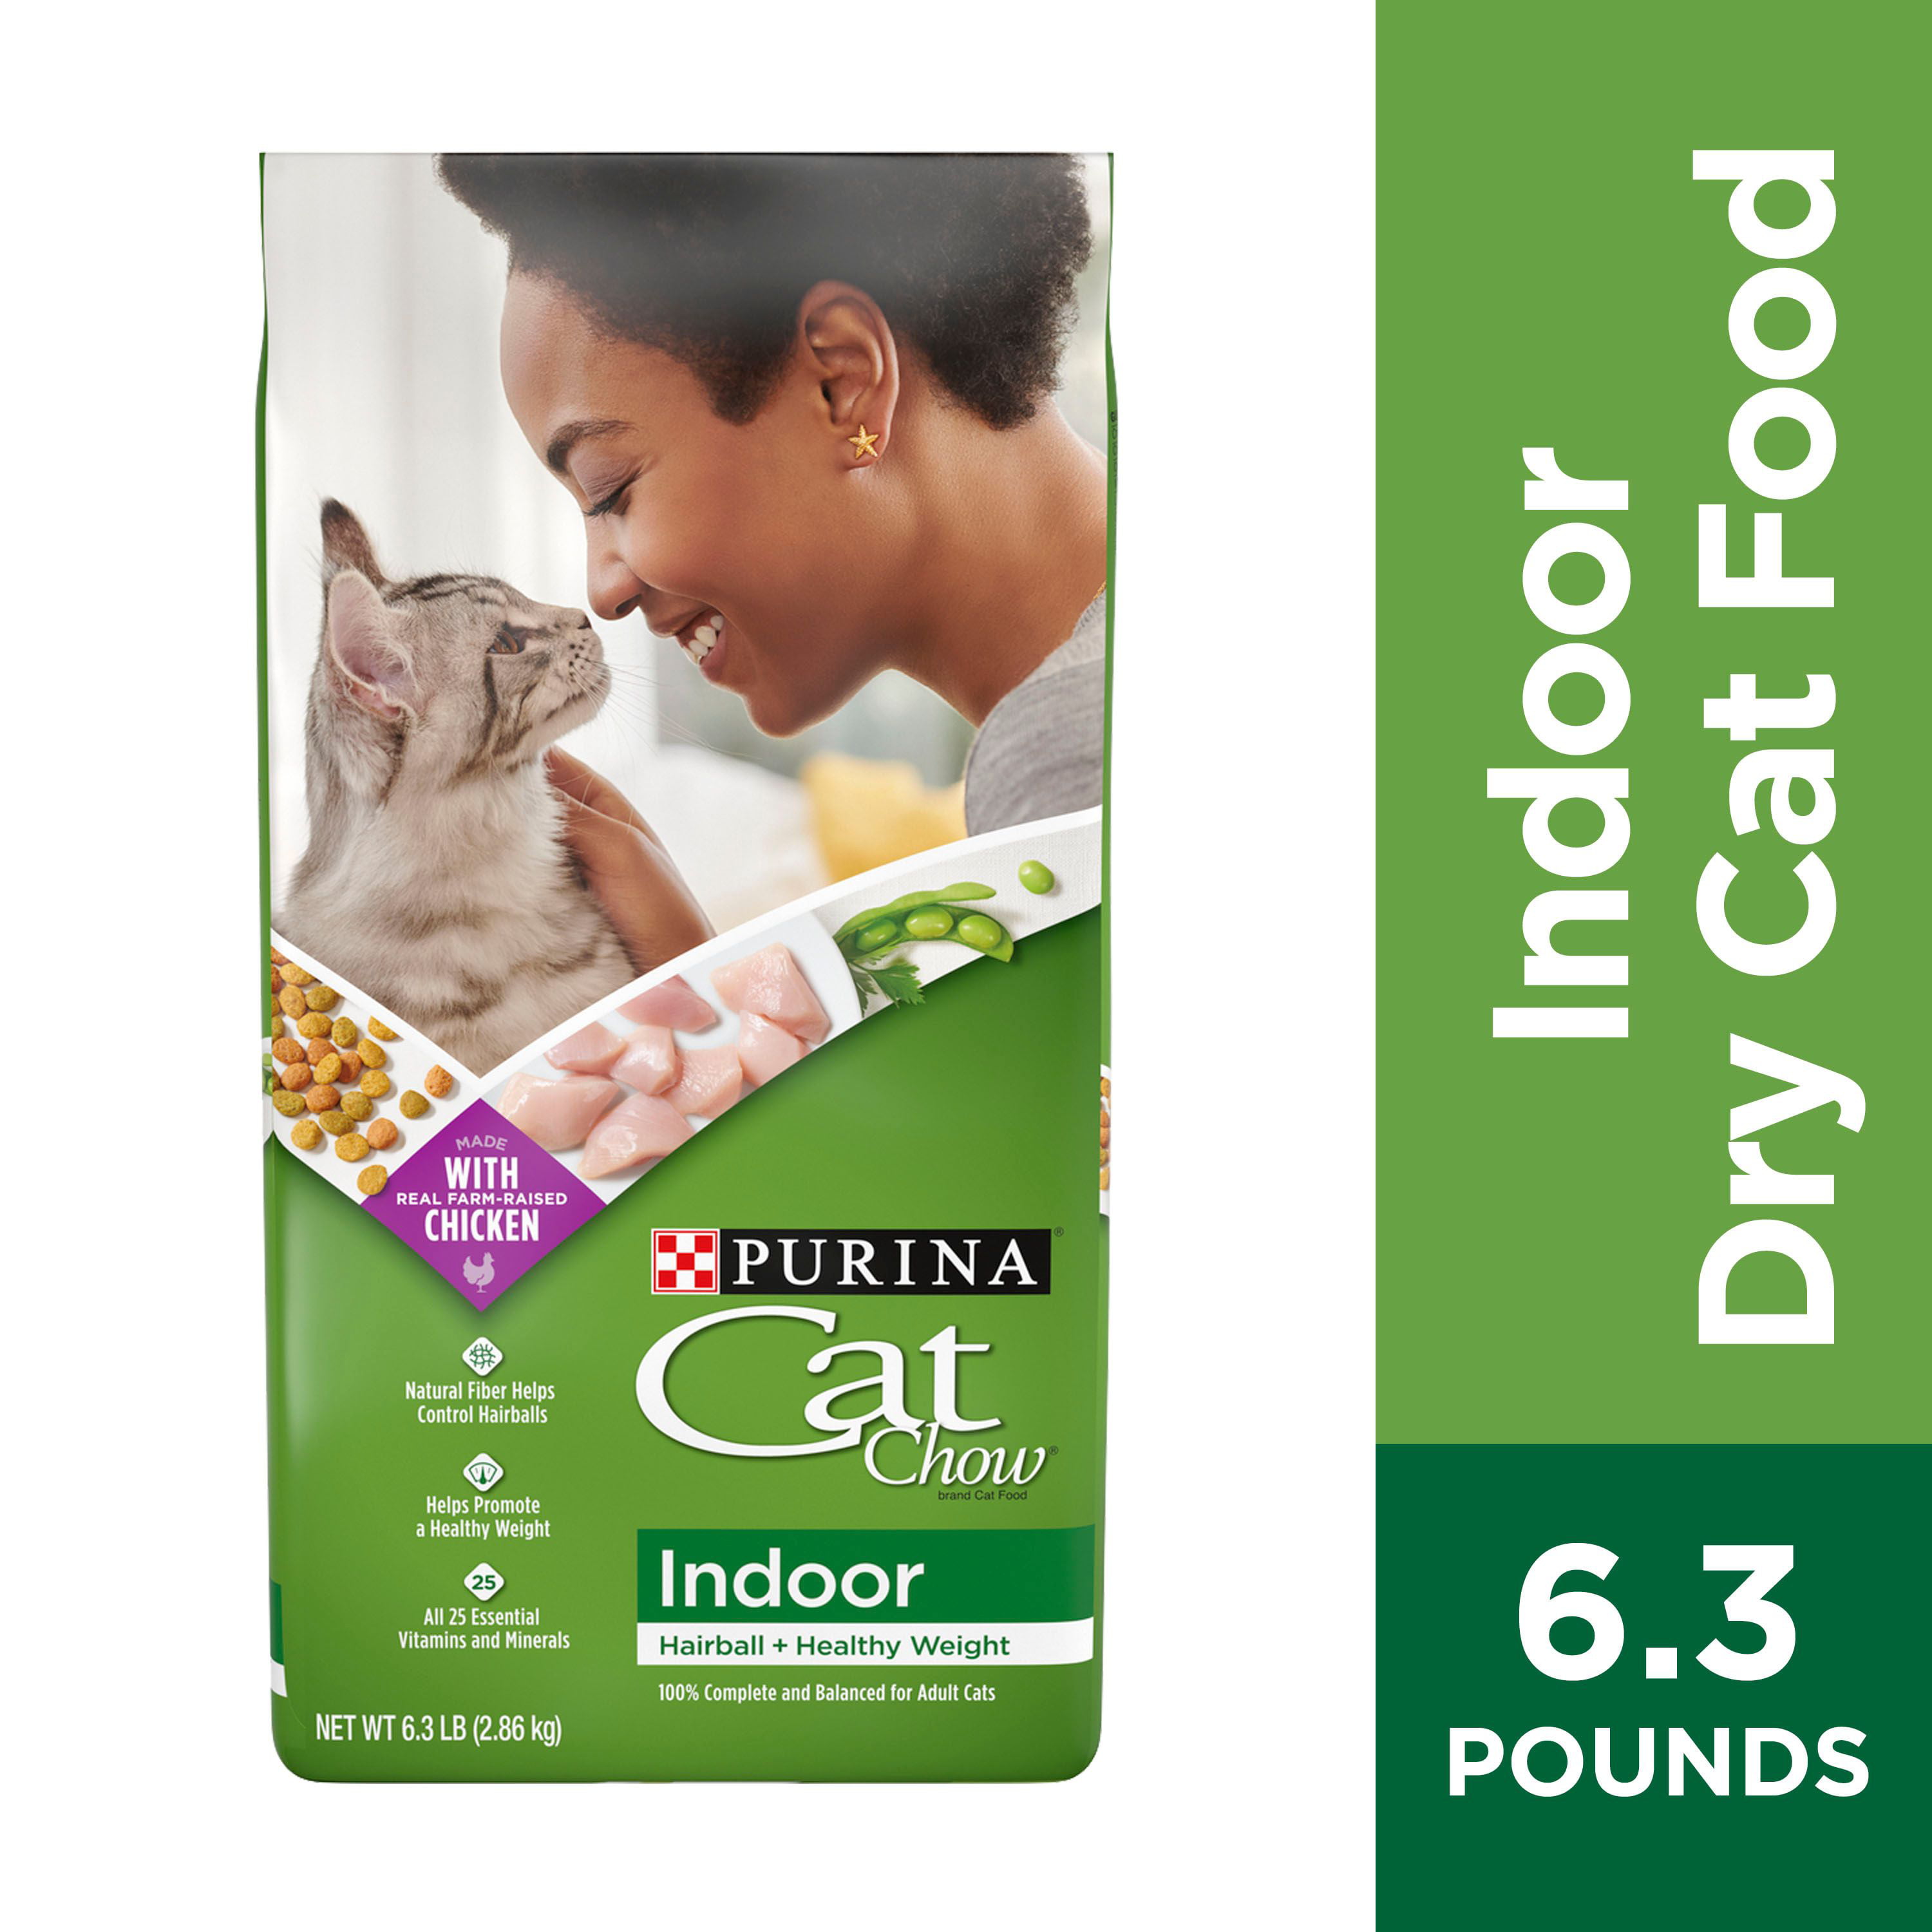 Purina Cat Chow Indoor Dry Cat Food, Hairball + Healthy Weight, 6.3 lb